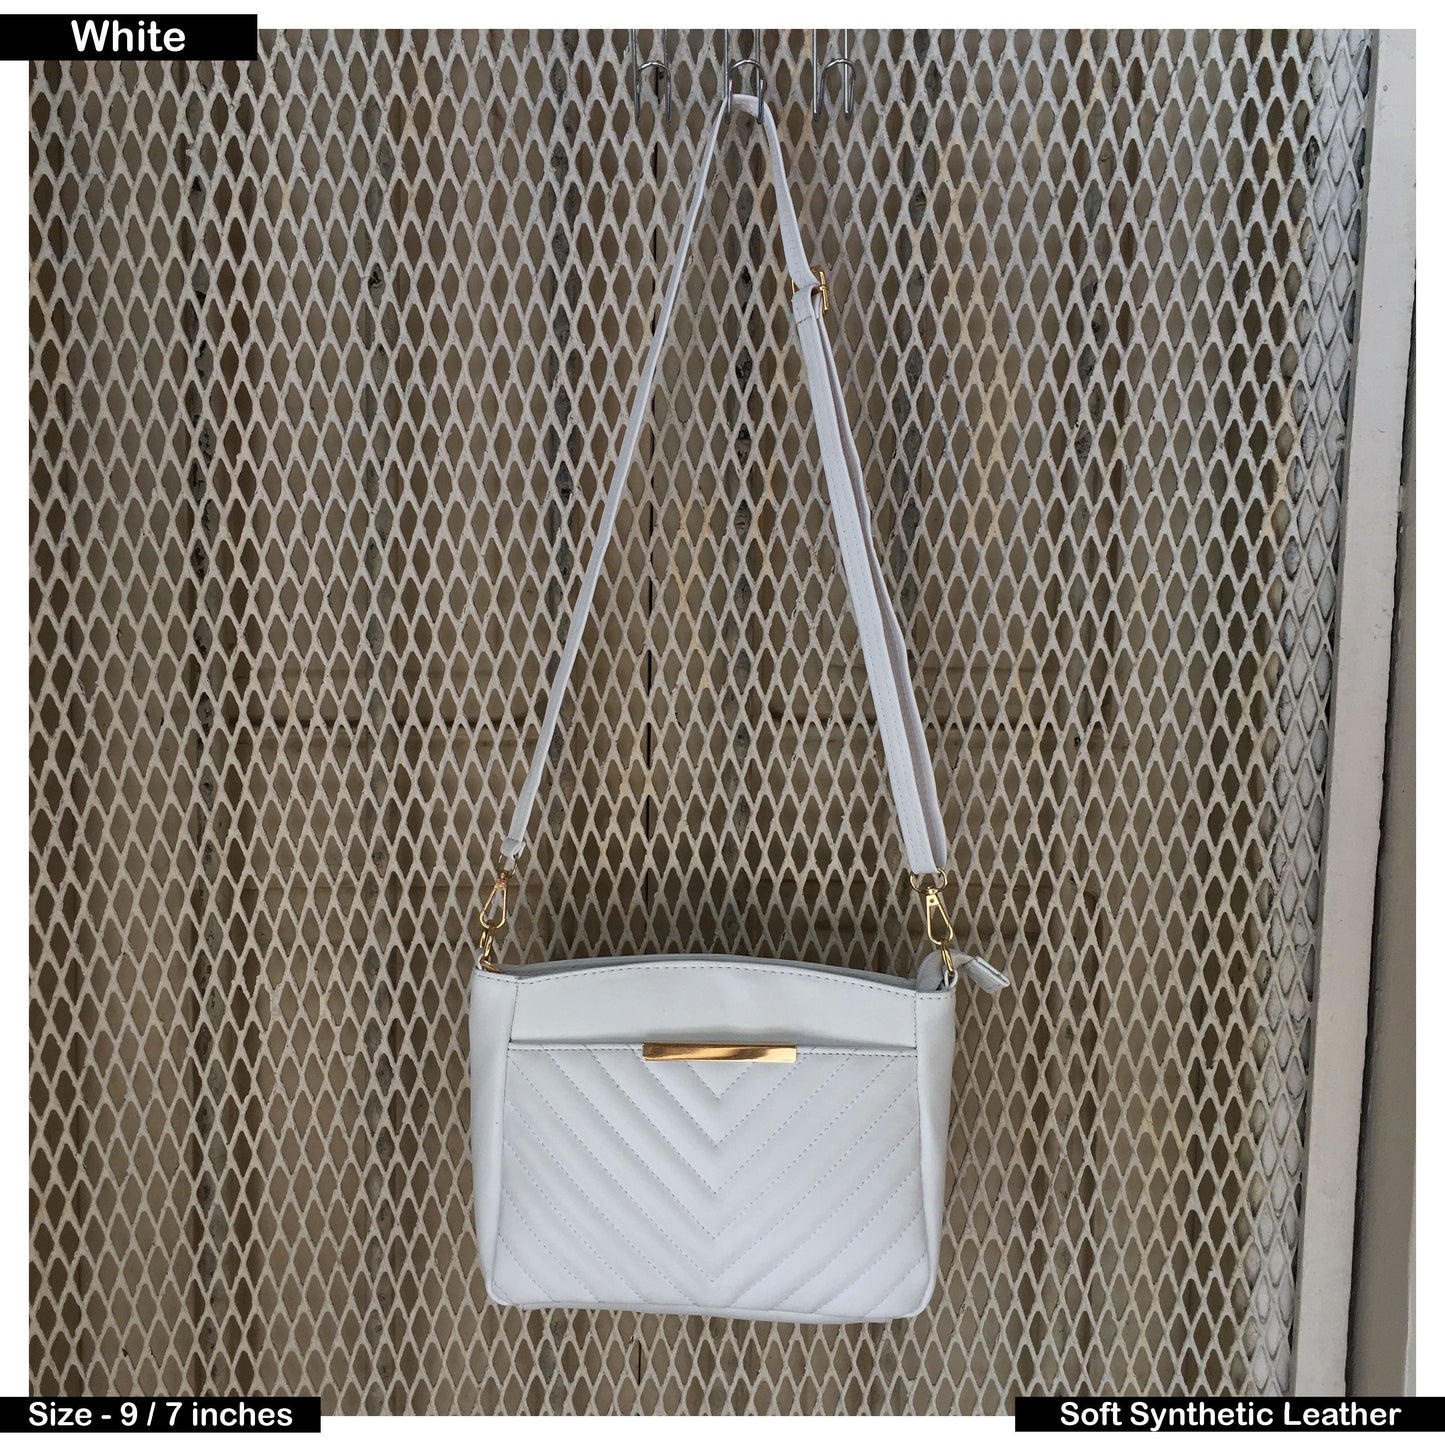 New Quilted Satchel - "Meesa" - White